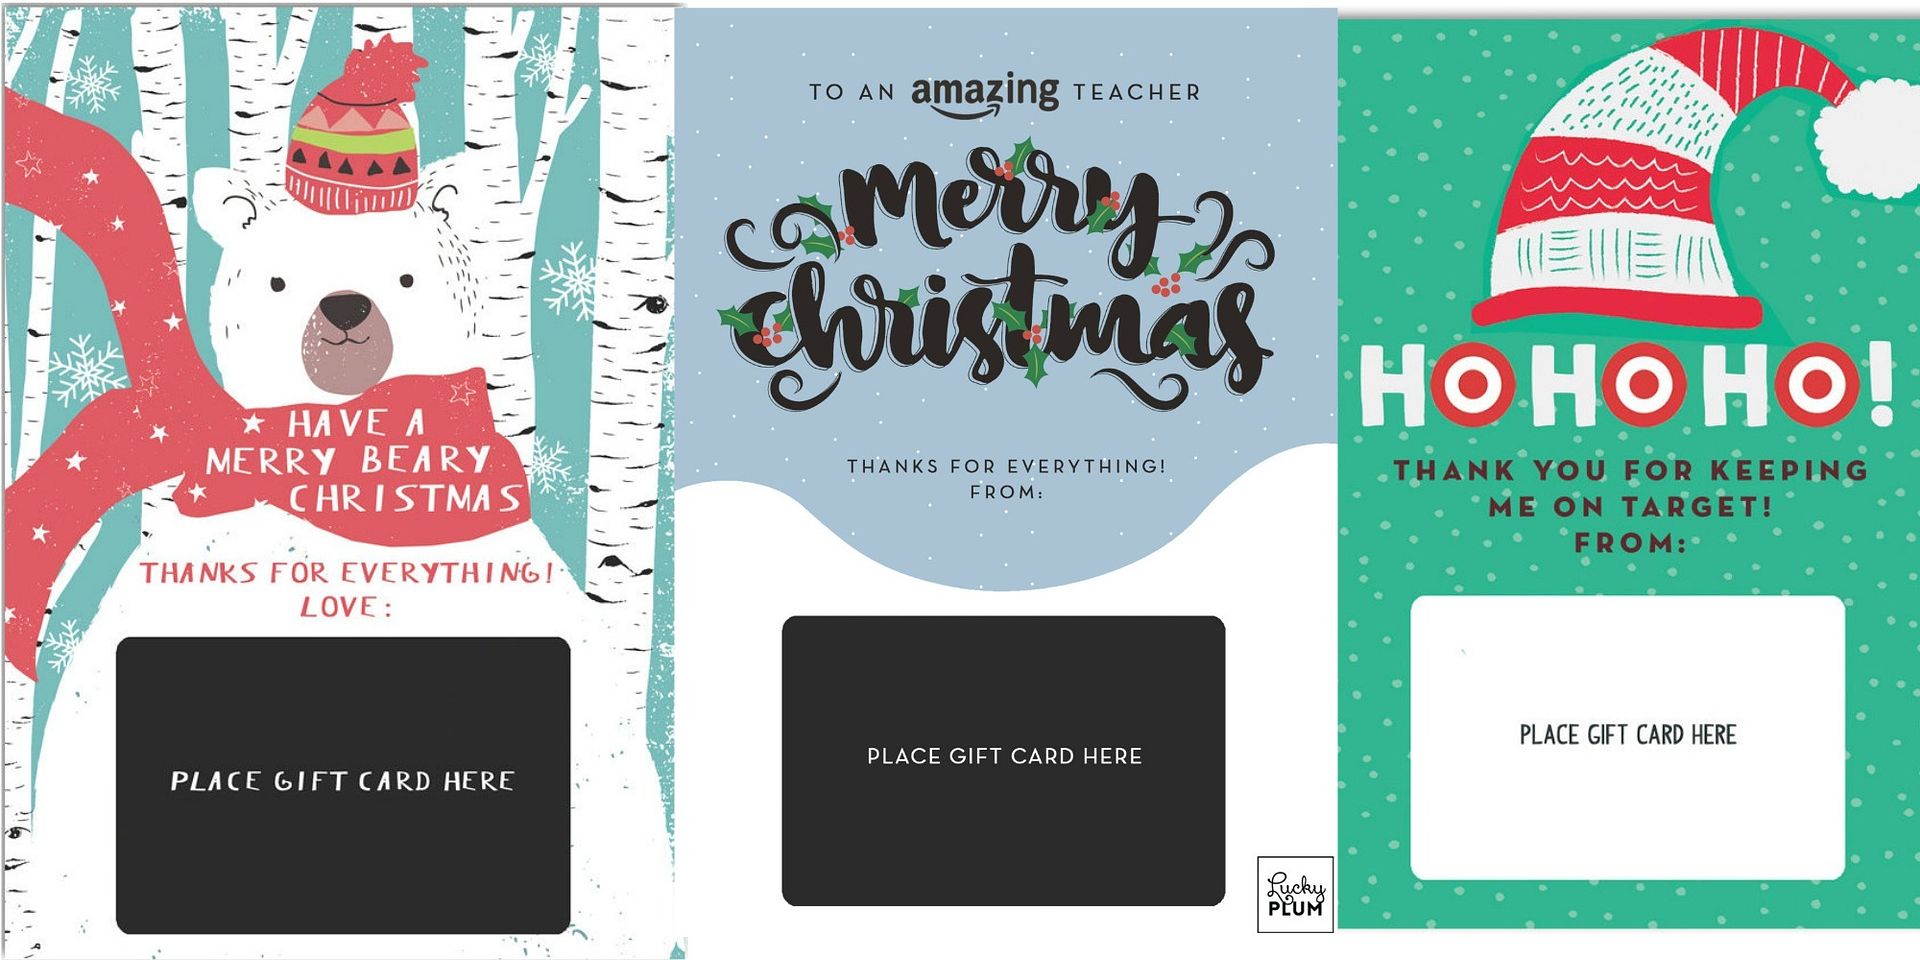 Full page printable gift card holders by Lucky Plum Studio on Etsy from general holiday wishes to specific messages for stores like Target and Starbucks